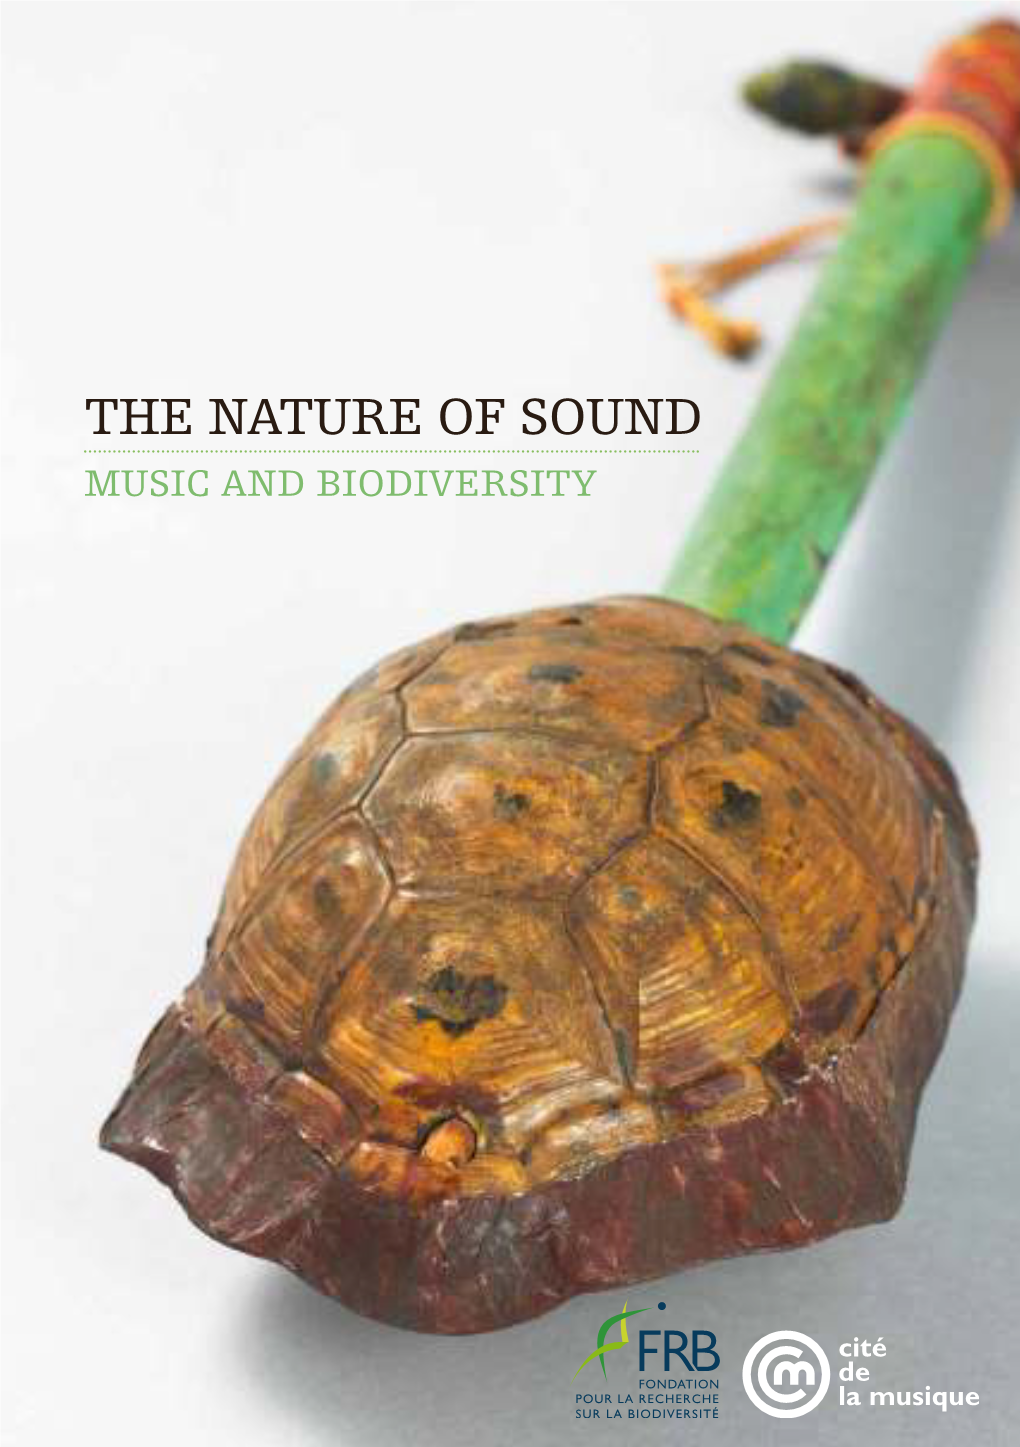 The Nature of Sound Music and Biodiversity the Richness of Nature and the Biodiversity of Music